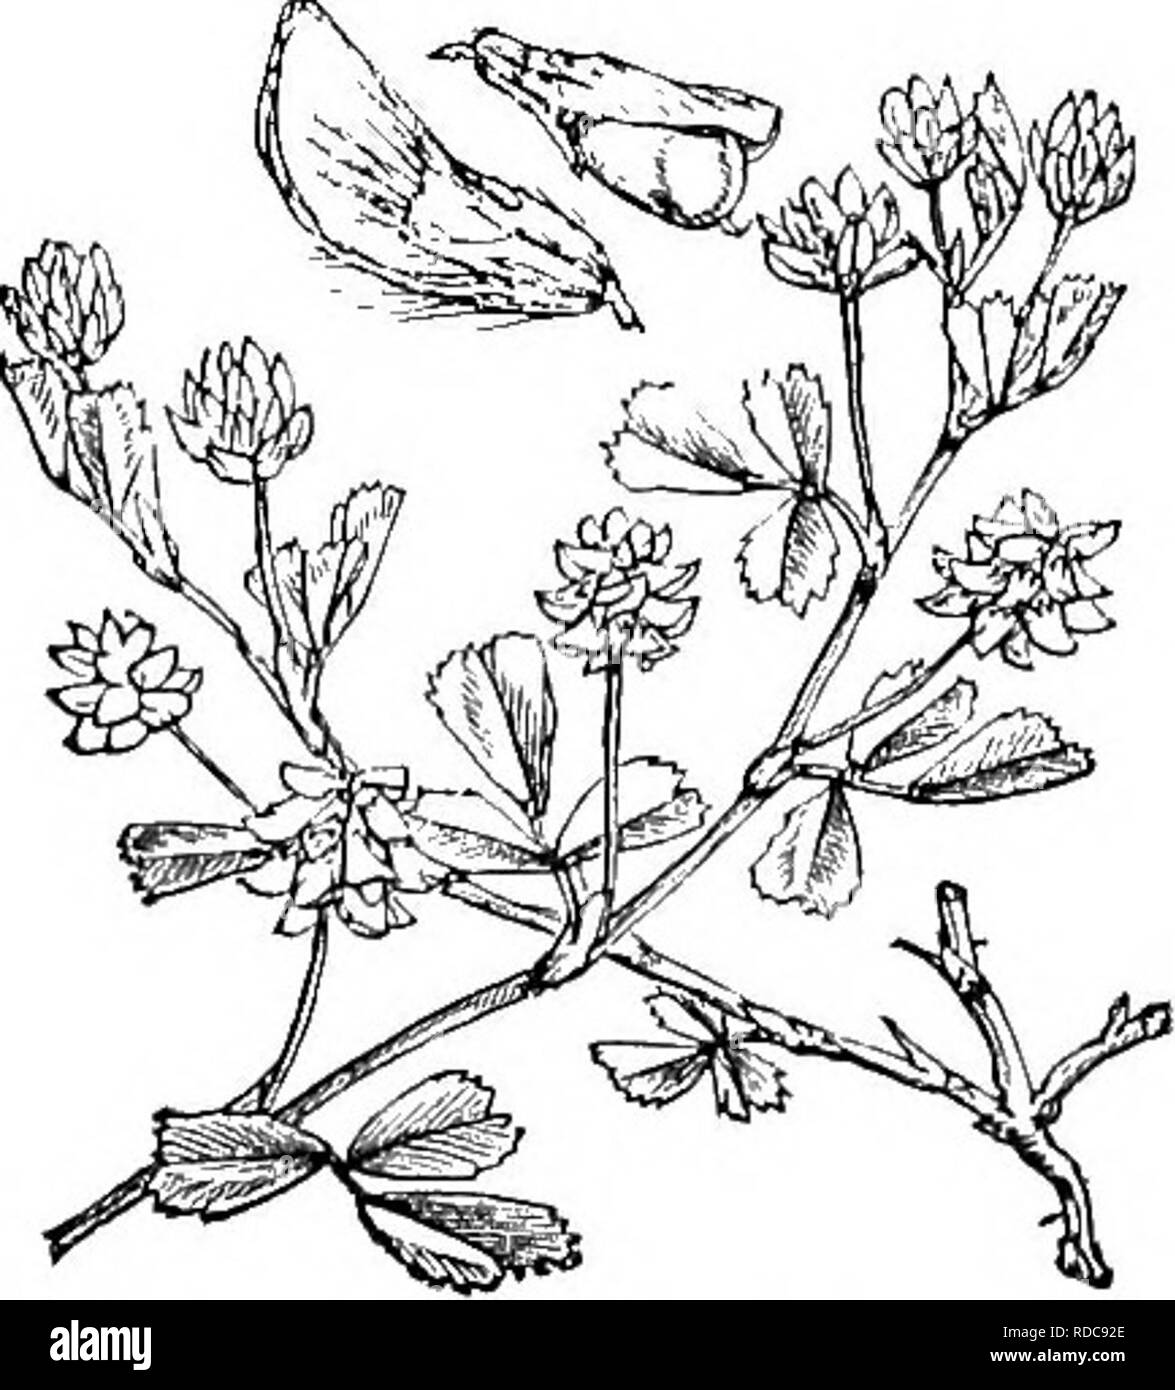 . A manual of veterinary hygiene. Veterinary hygiene. Crimson Clover (Fream). Fig. 70.—Yellow Suckling Glover (Fream). Tebfoil, Yellow Clovee, oe Hop Teefoil, Medicago lupulina (Fig. 71). — This is not much appreciated for feeding purposes, though in a mixture of other clovers and grasses it is a good fodder plant. LucEENE, M. sativa (Fig. 72), is an excellent fodder plant, which from the fact of its sending down deep roots is capable of withstanding drought. Under the influence of irrigation in hot climates it yields abundantly, and in temperate climates without irrigation three or four cutti Stock Photo